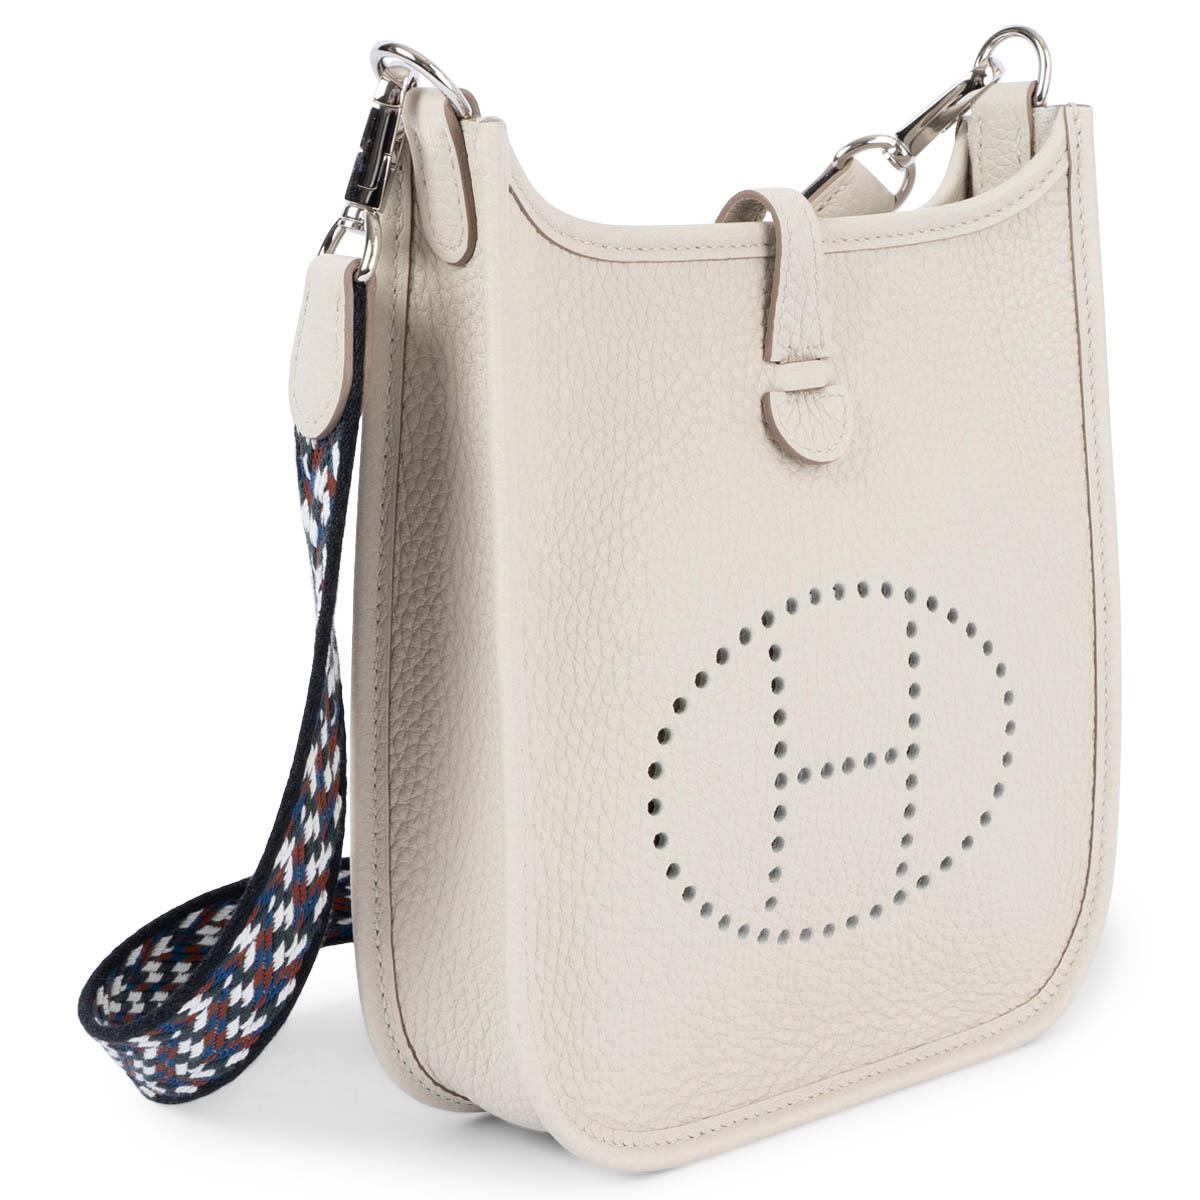 100% authentic Hermès Evelyne 16 TPM Crossbody Bag in Beton (pastel grey) Taurillon Clemence leather with a zigzag wool sangle strap in black and white, perforated leather 